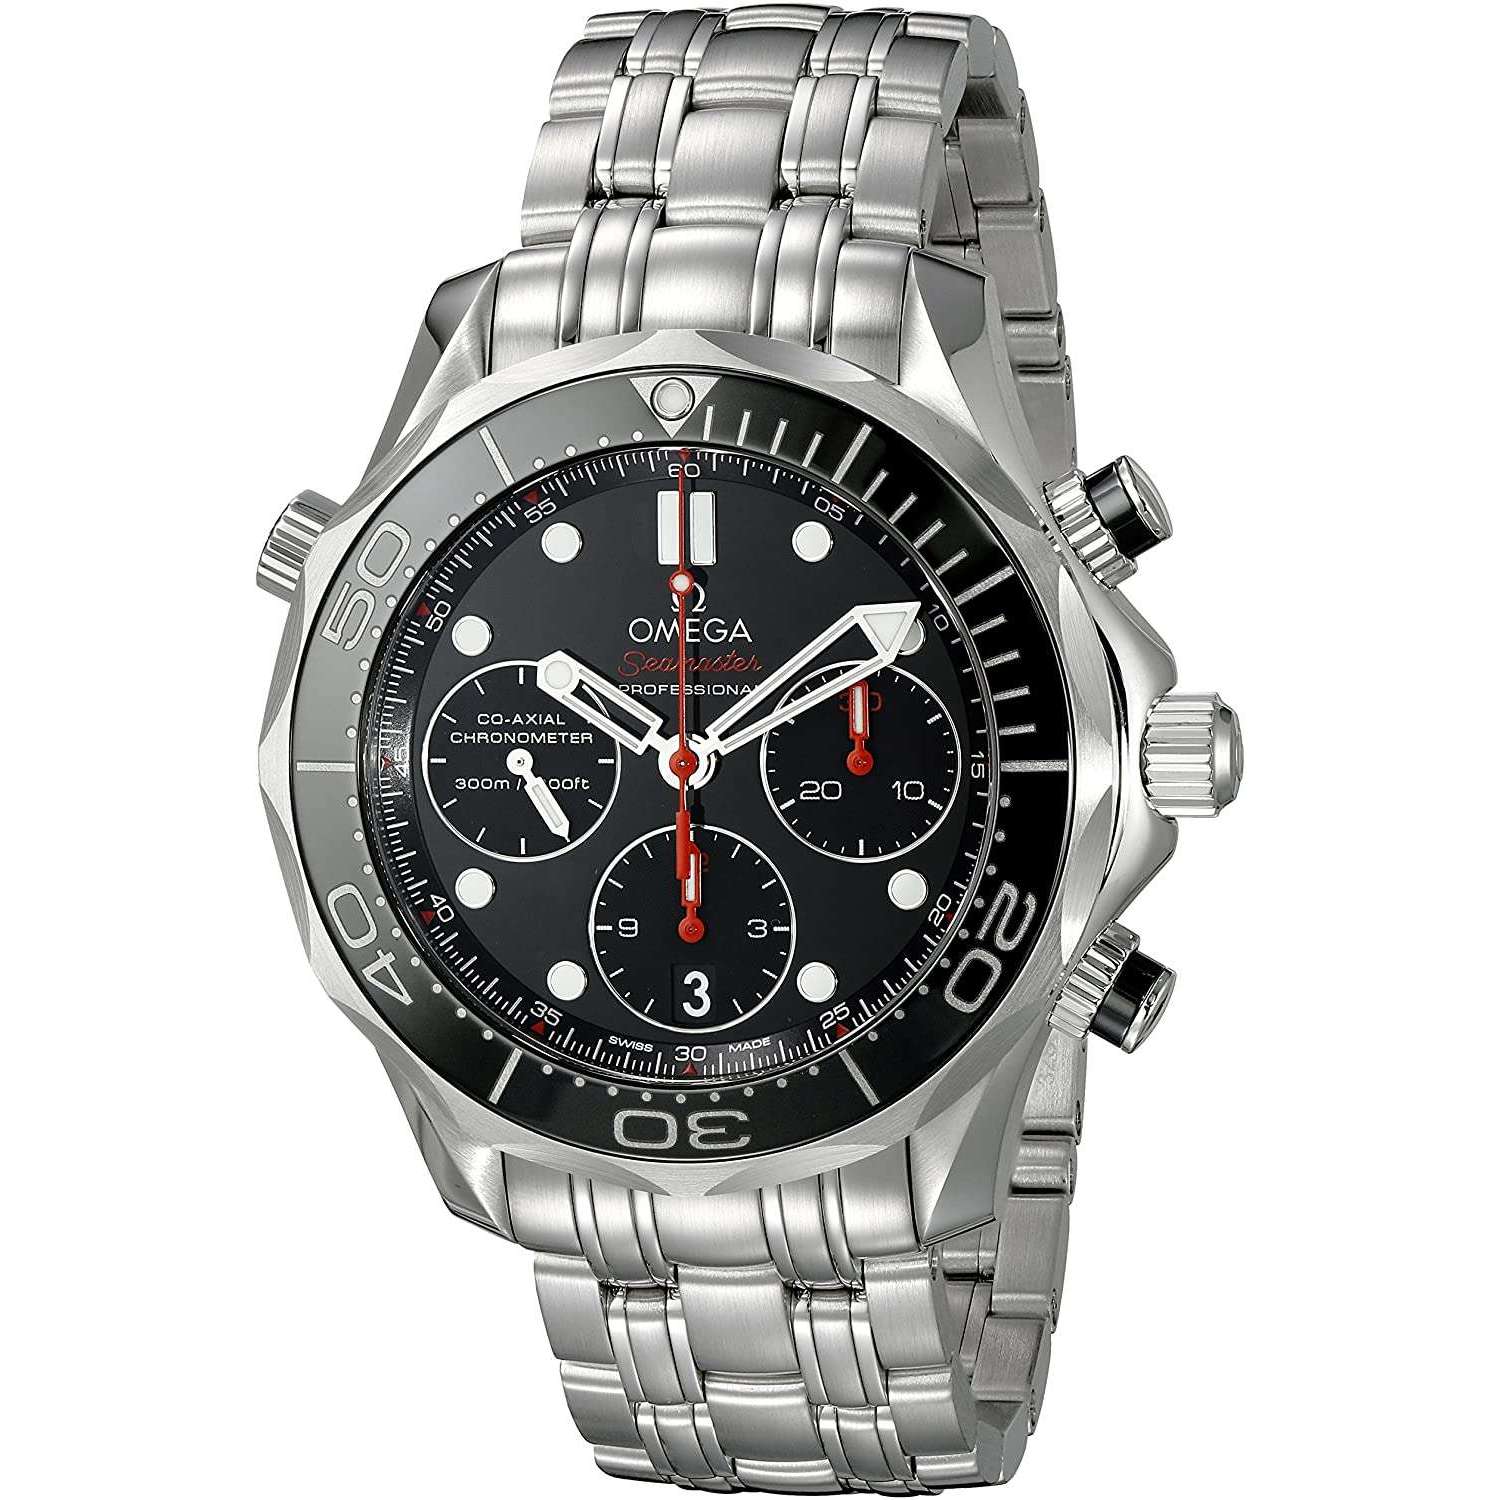 ROOK JAPAN:OMEGA SEAMASTER PROFESSIONAL CO-AXIAL CHRONOMETER 41.5 MM MEN WATCH 212.30.42.50.01.001,Luxury Watch,Omega